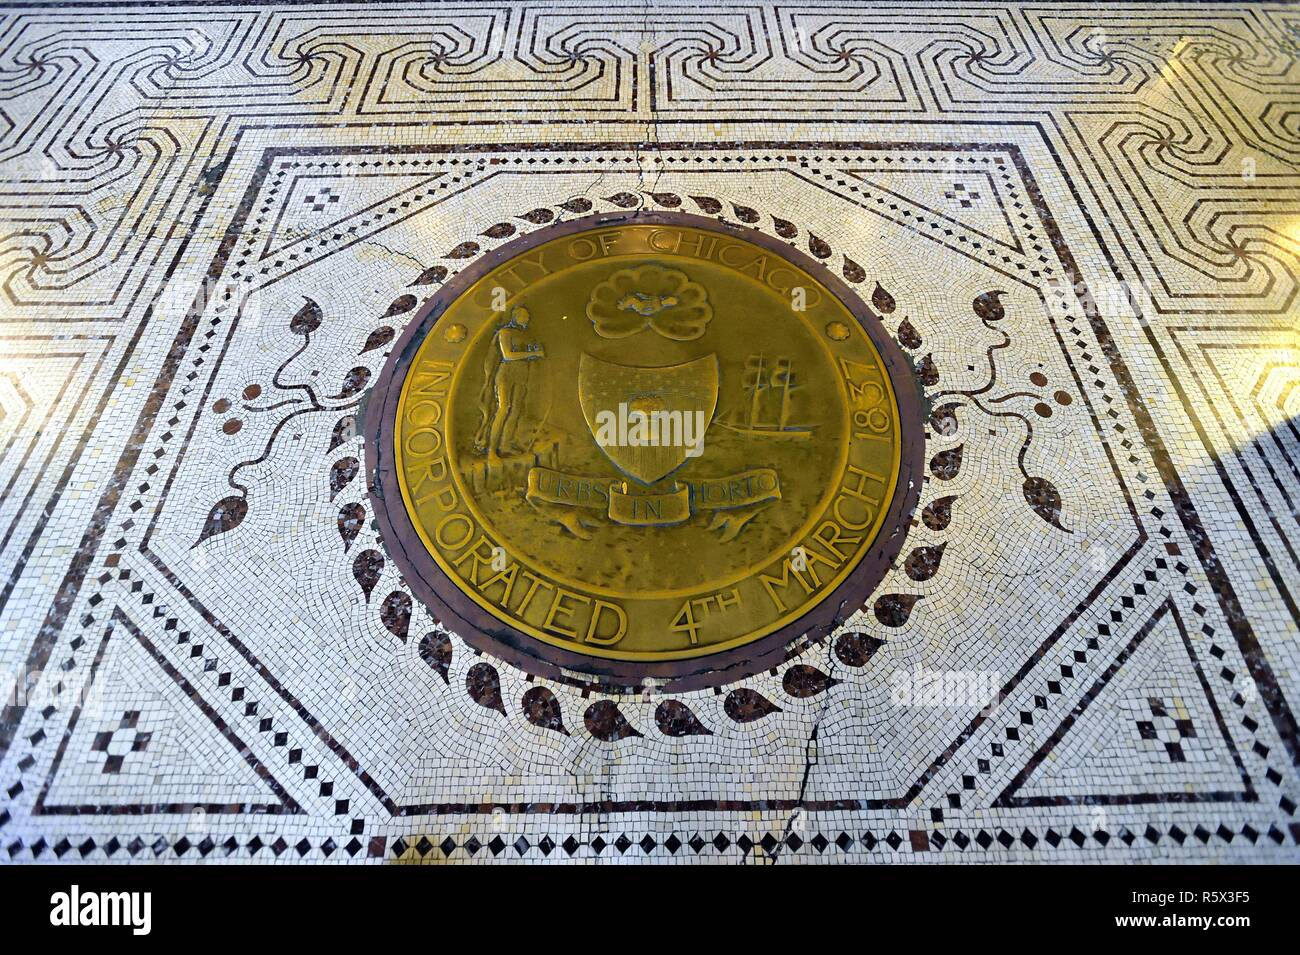 Chicago, Illinois, USA. Detailed, inlaid tile flooring that includes a seal of the City of Chicago near an entrance to the Chicago Cultural Center. Stock Photo